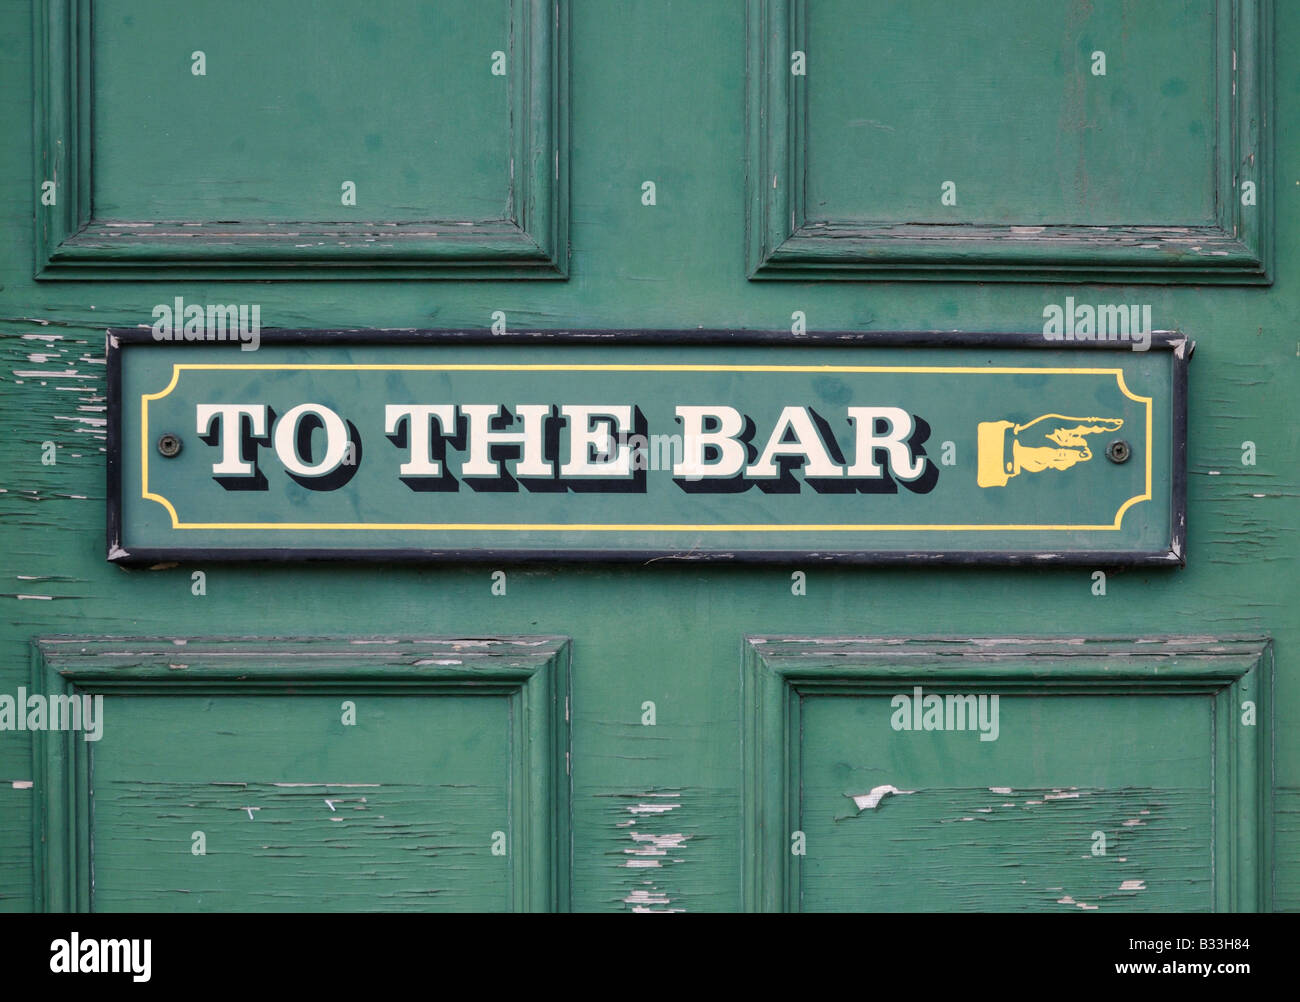 Pub door showing weathered sign 'To the bar' with a painted hand pointing to the right 1/2 Stock Photo